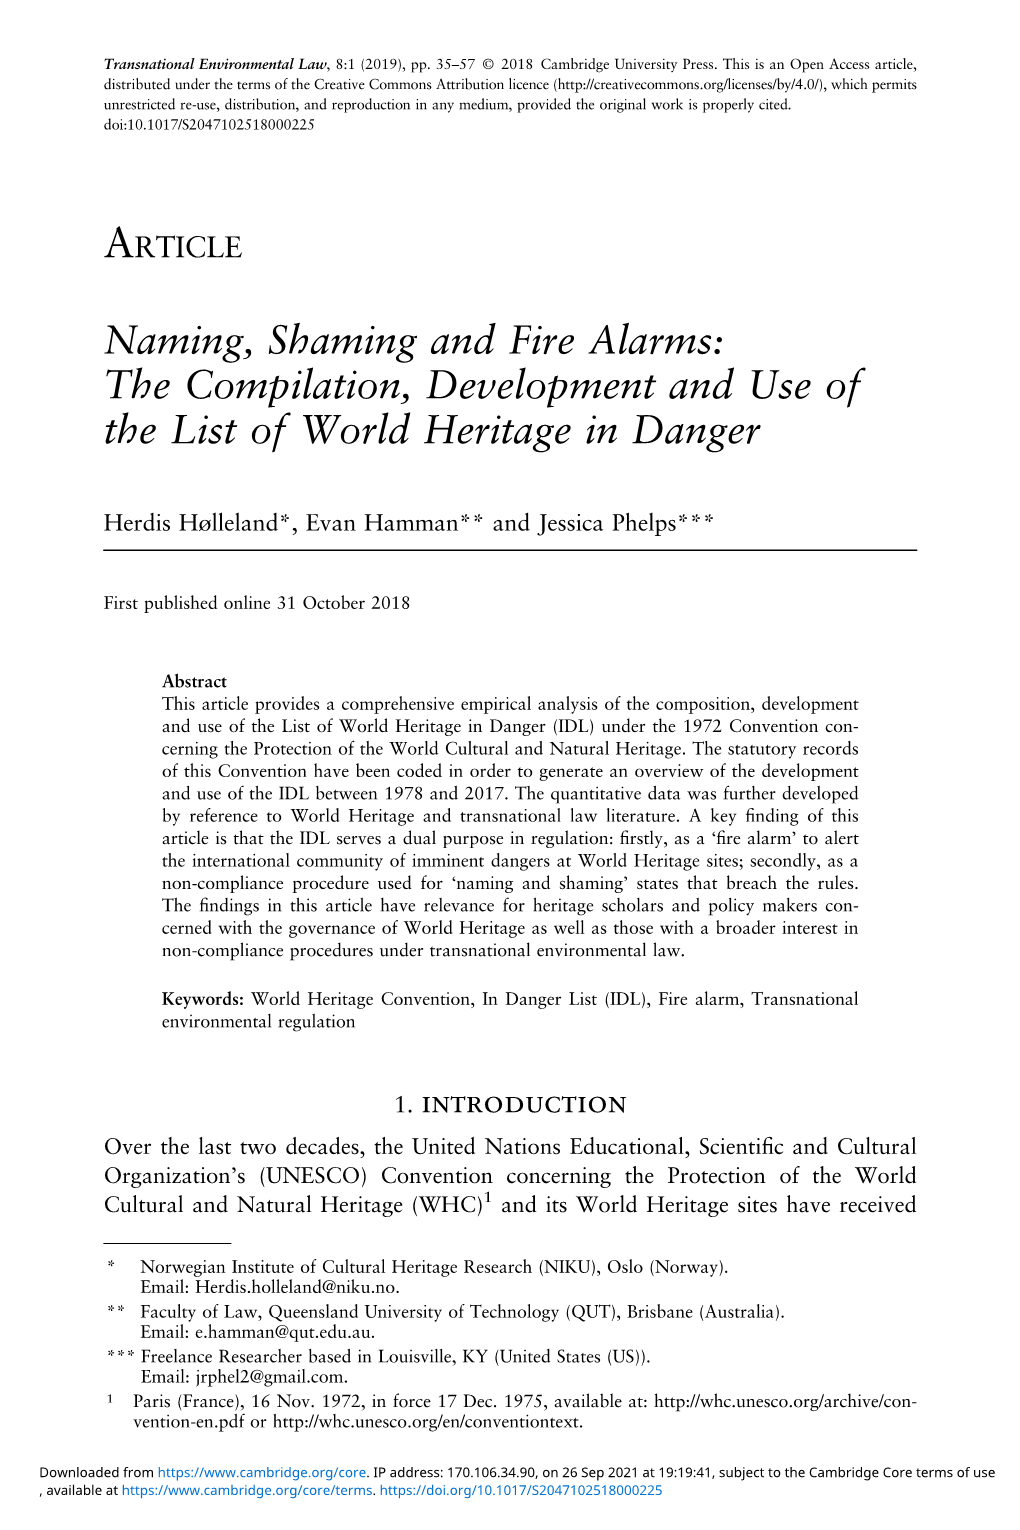 Naming, Shaming and Fire Alarms: the Compilation, Development and Use of the List of World Heritage in Danger